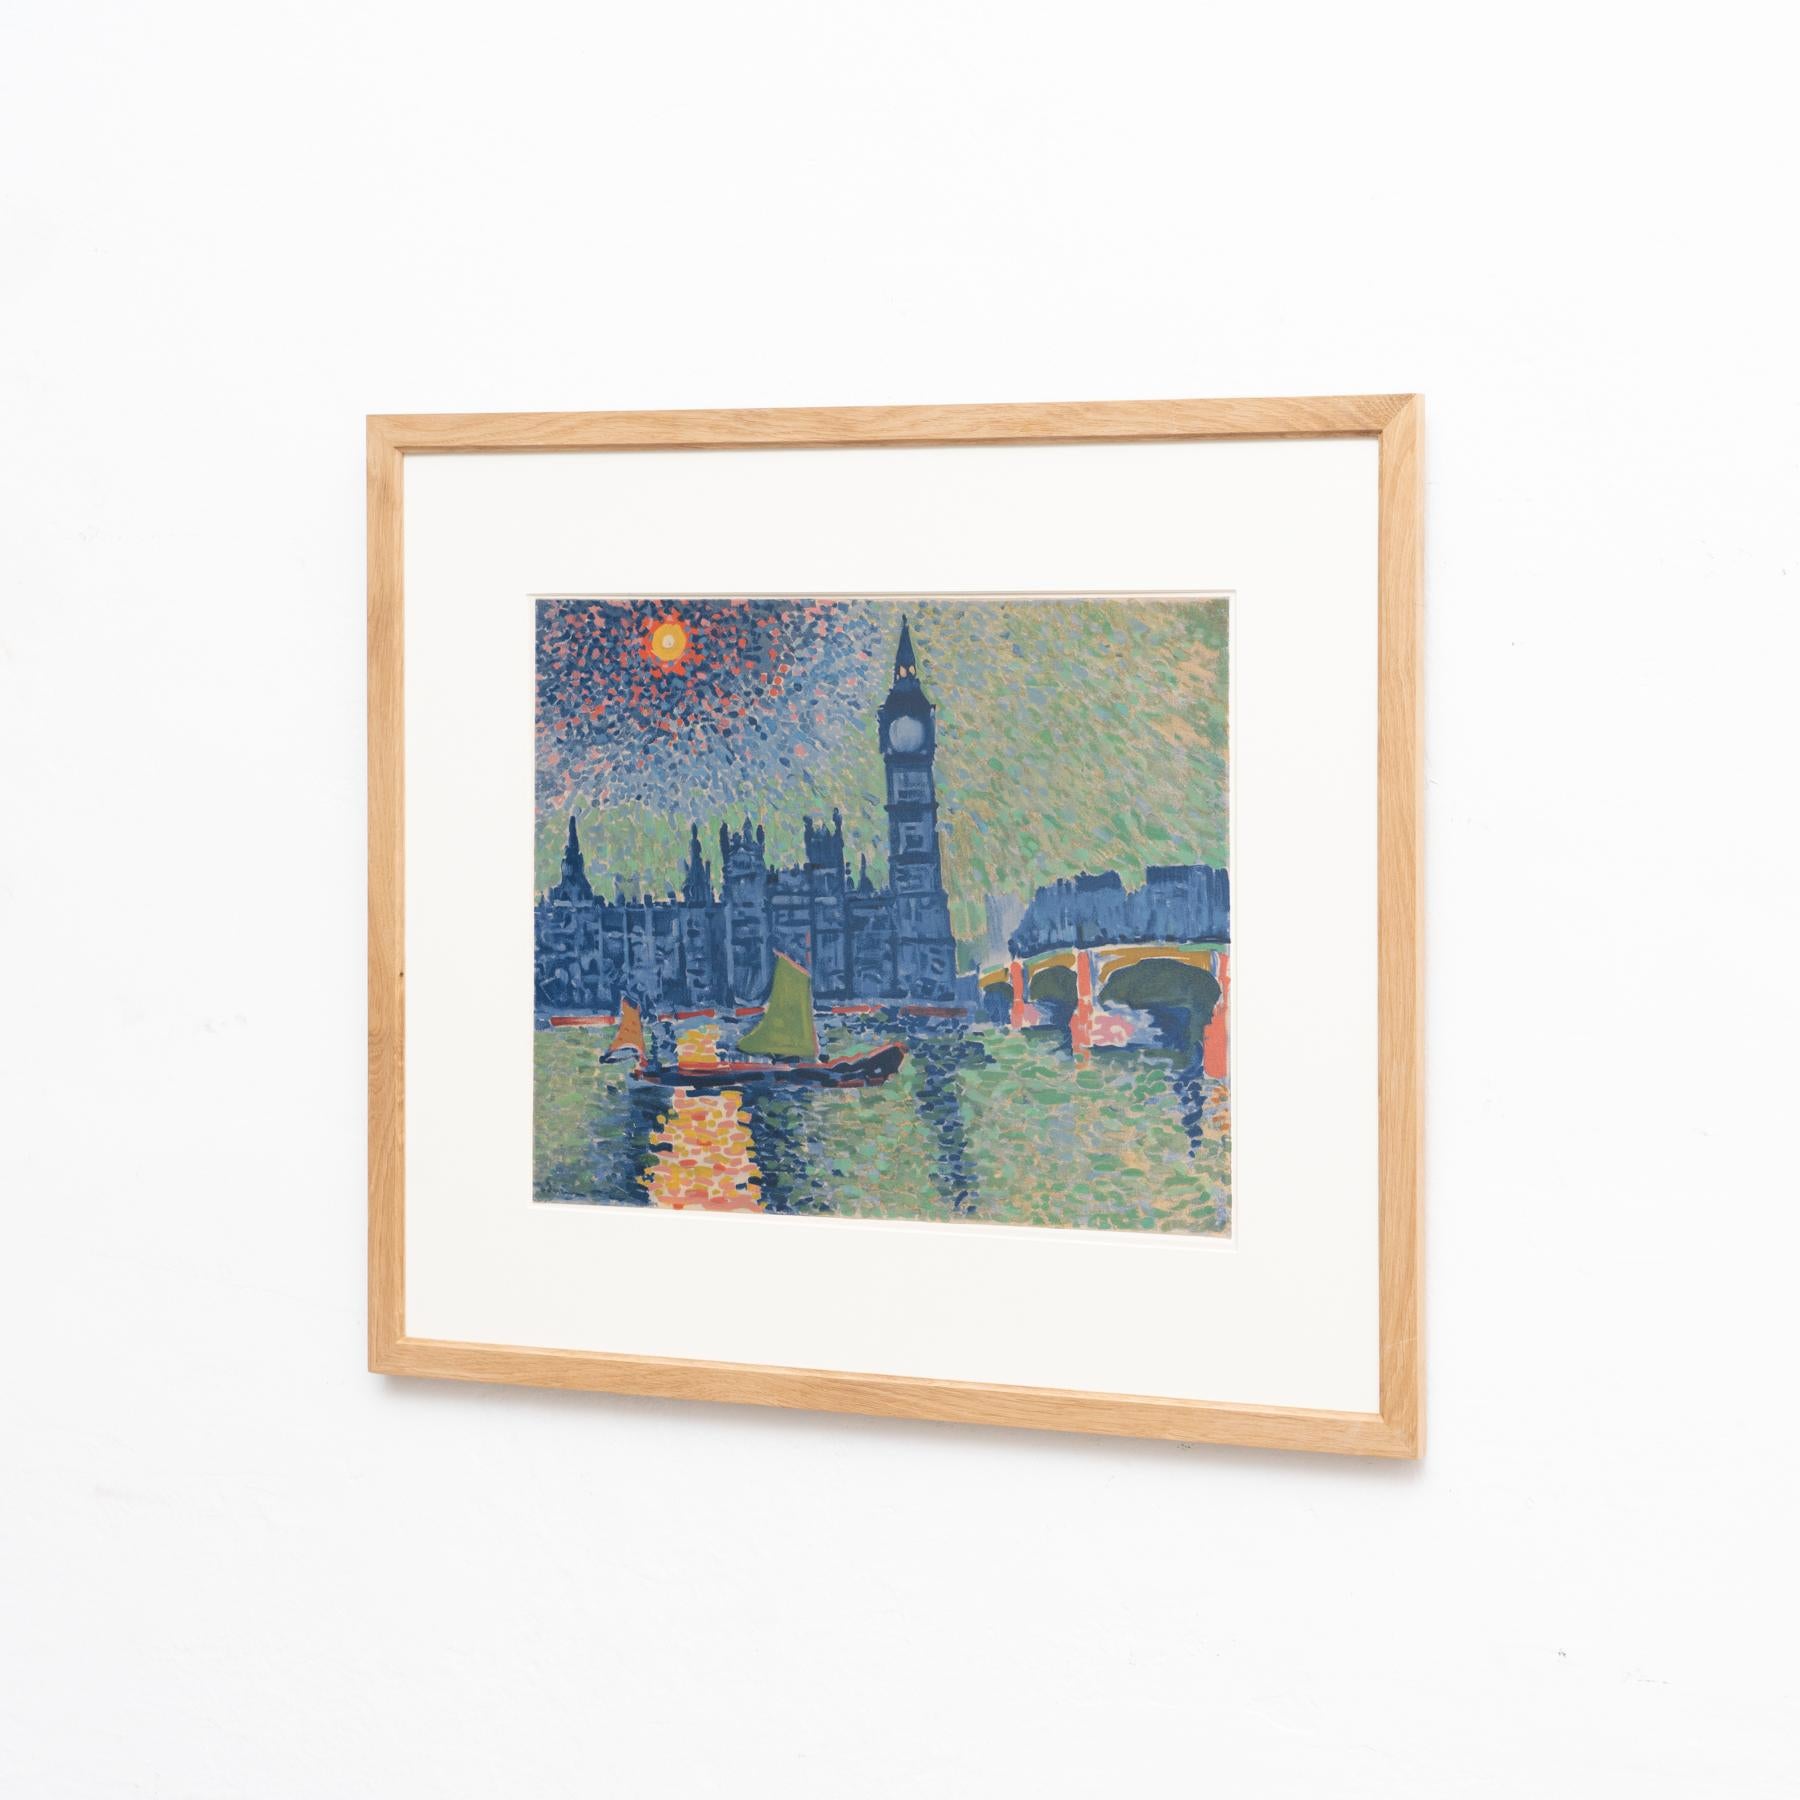 Original 'Big Ben' color lithograph by André Derain.

Lithograph printed from an original painting made by the author in France, circa 1906.

Published by Fernand Mourlot in Les Fauves. Paris, circa 1972. 

Framed and signed in the